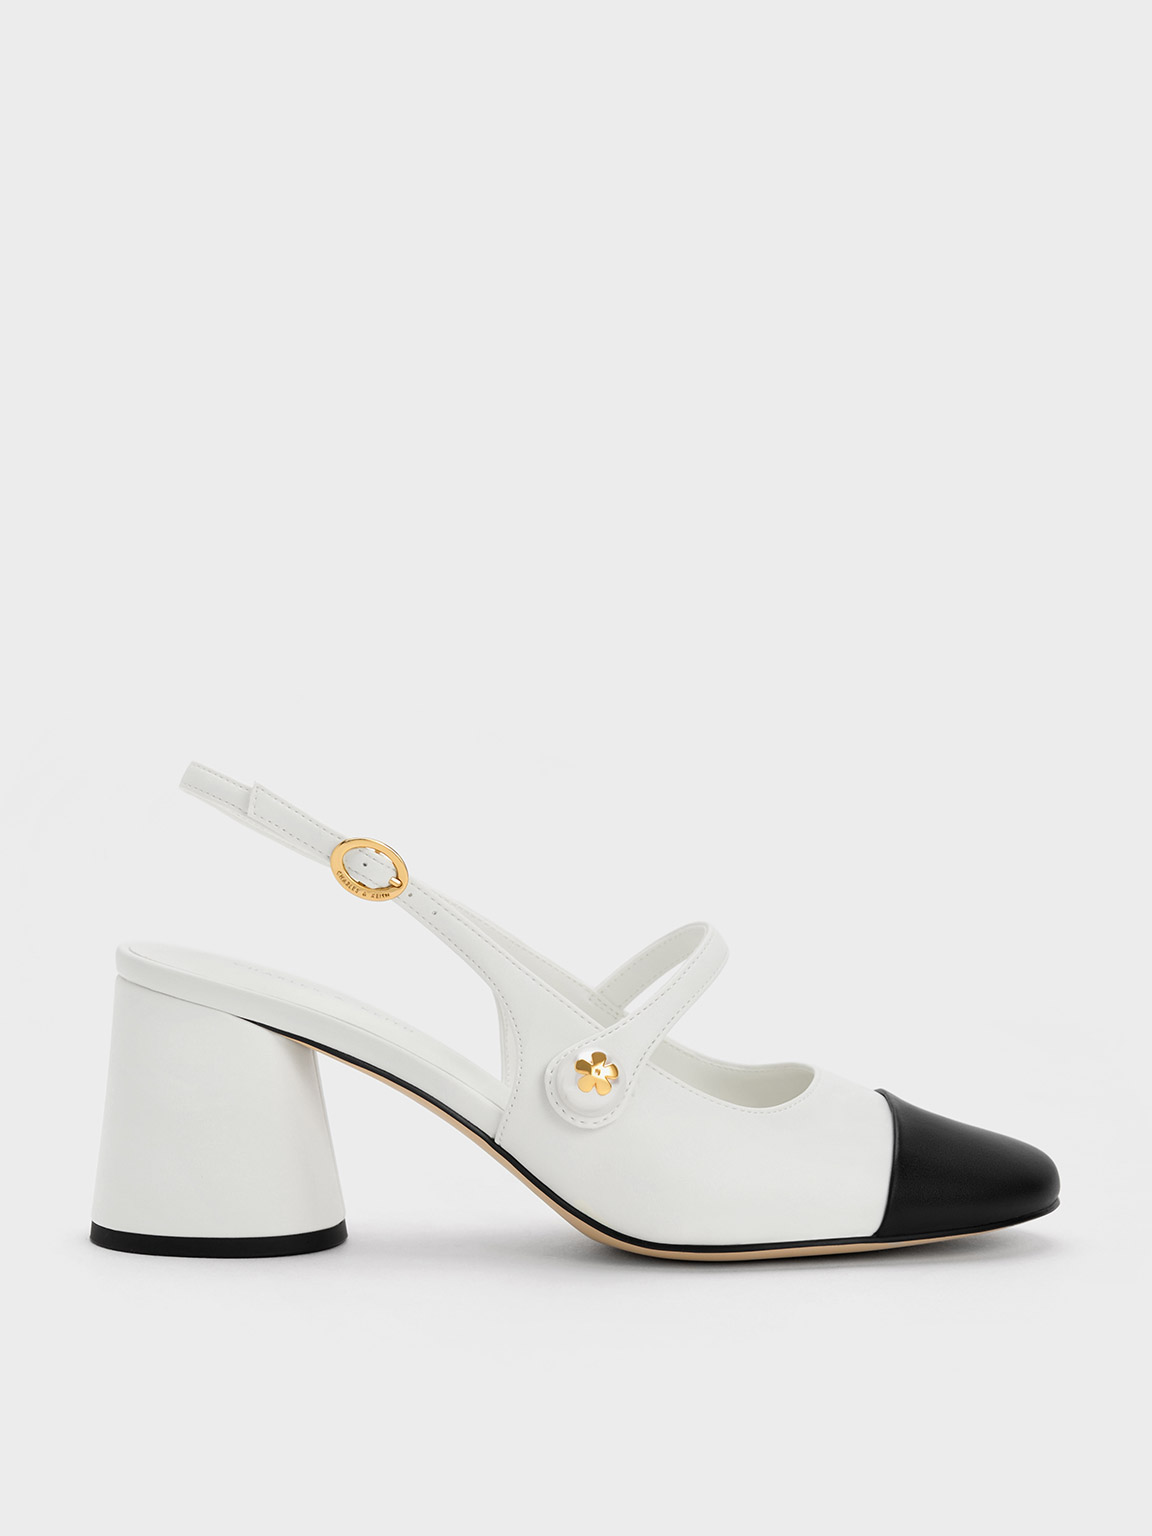 Charles & Keith Pearl Embellished Slingback Pumps In White